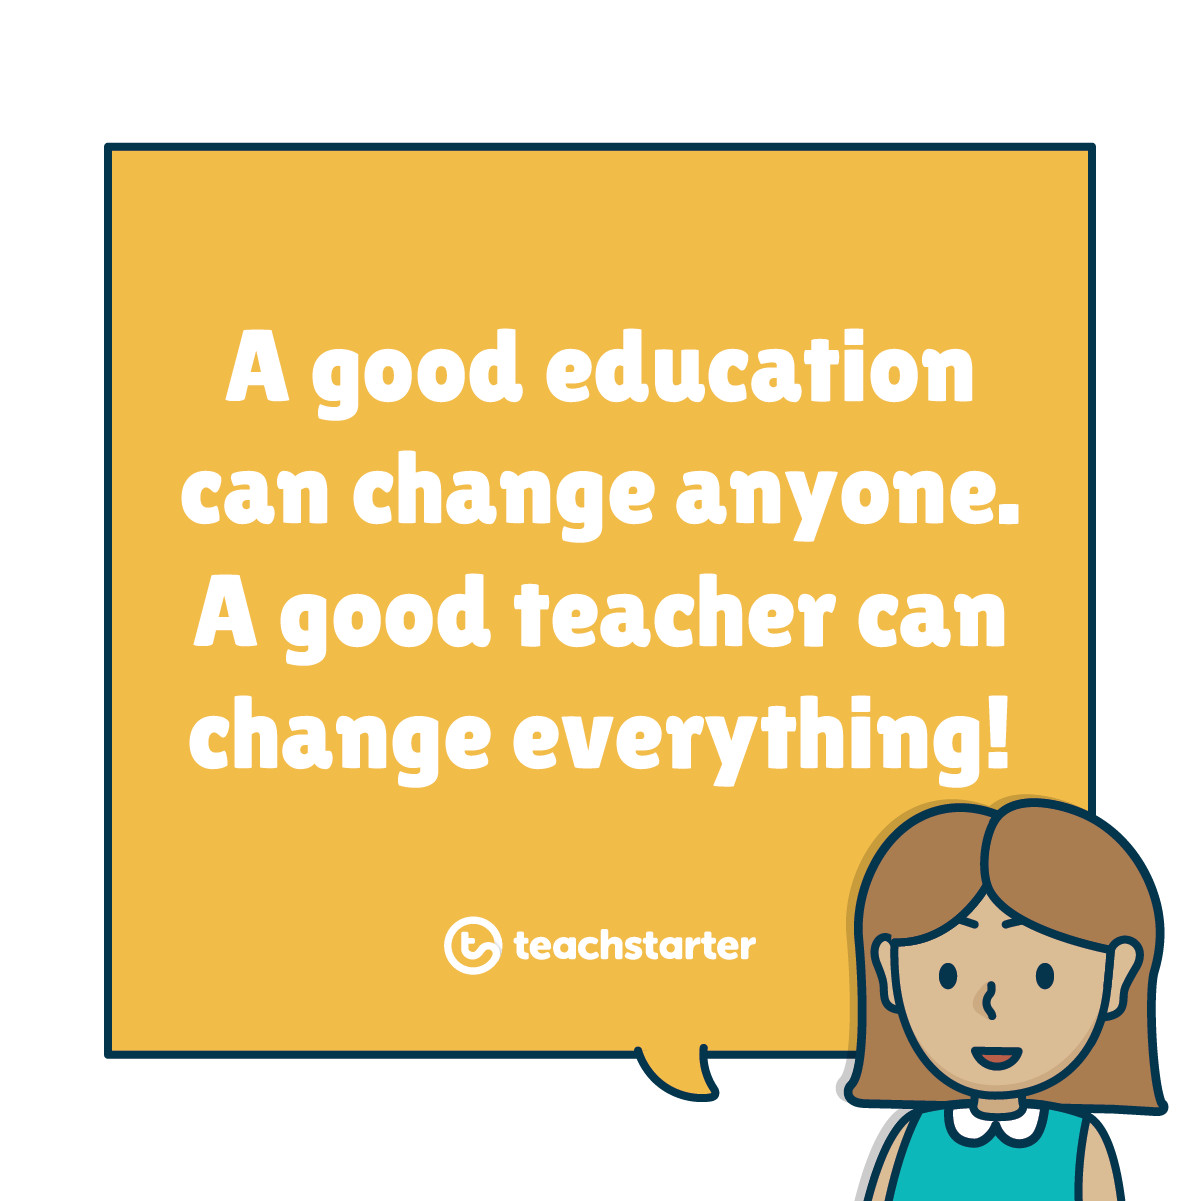 Inspirational Education Quotes For Teachers
 10 Inspirational Quotes for Teachers